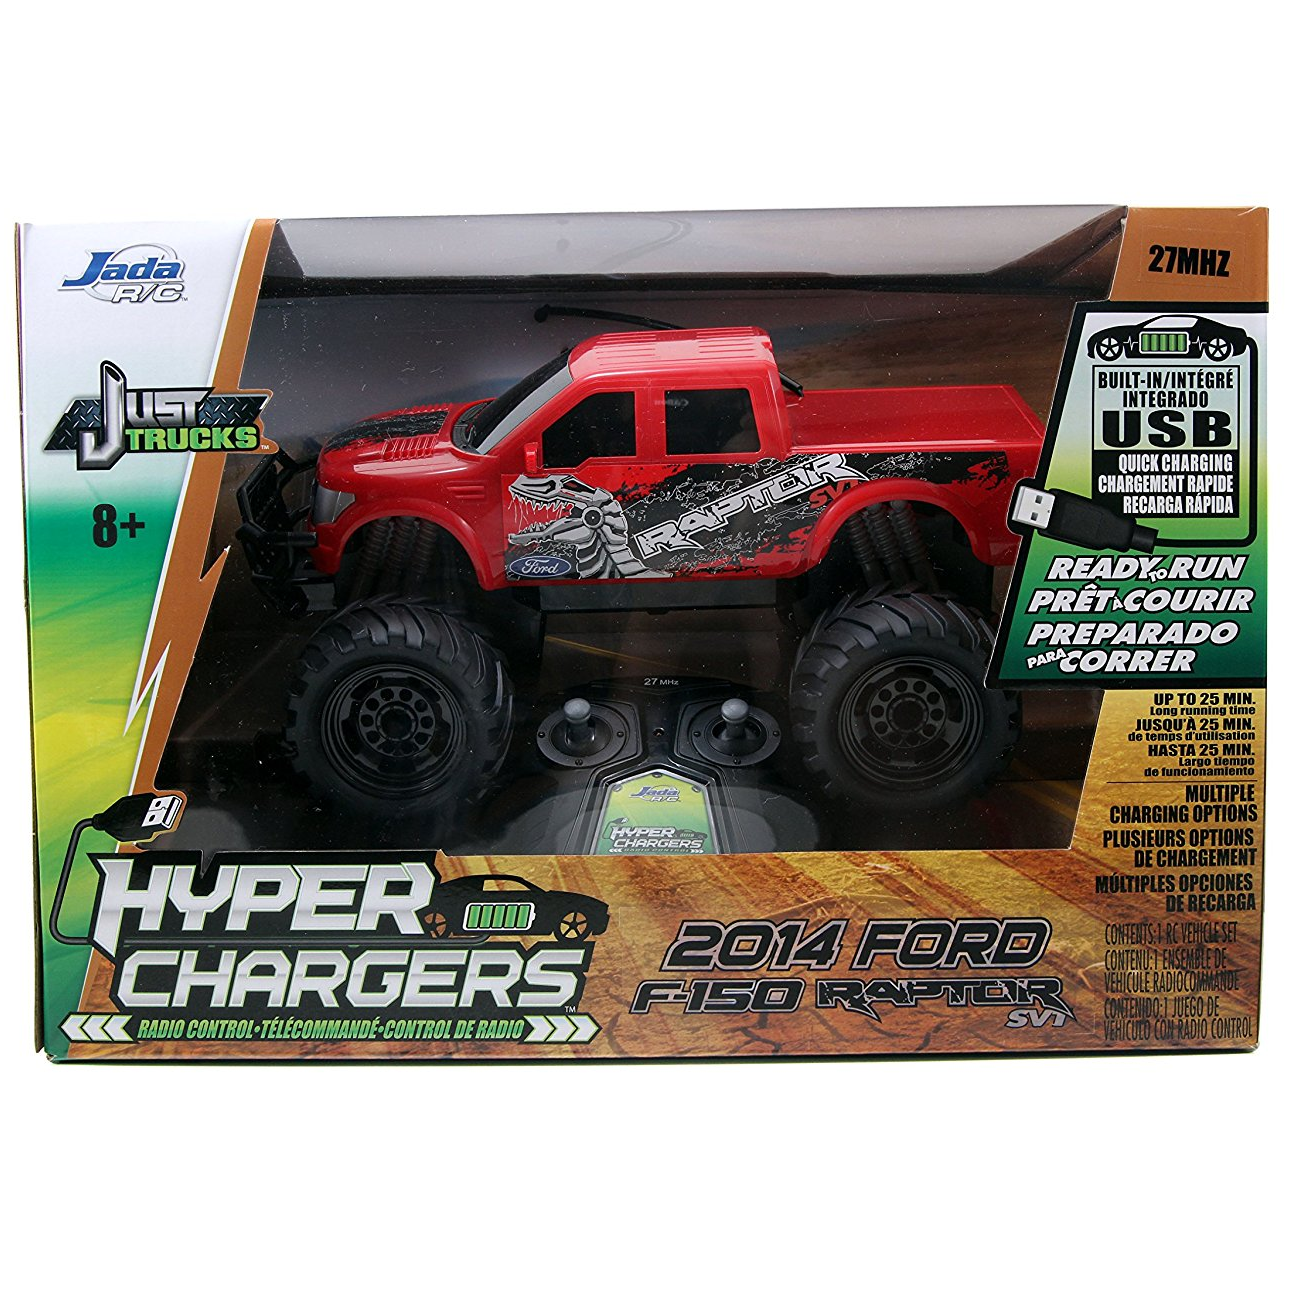 Amazon: Jada Toys HyperChargers Just Truck 2014 Ford F-150 SVT Raptor R/C Vehicle Only $19.99!